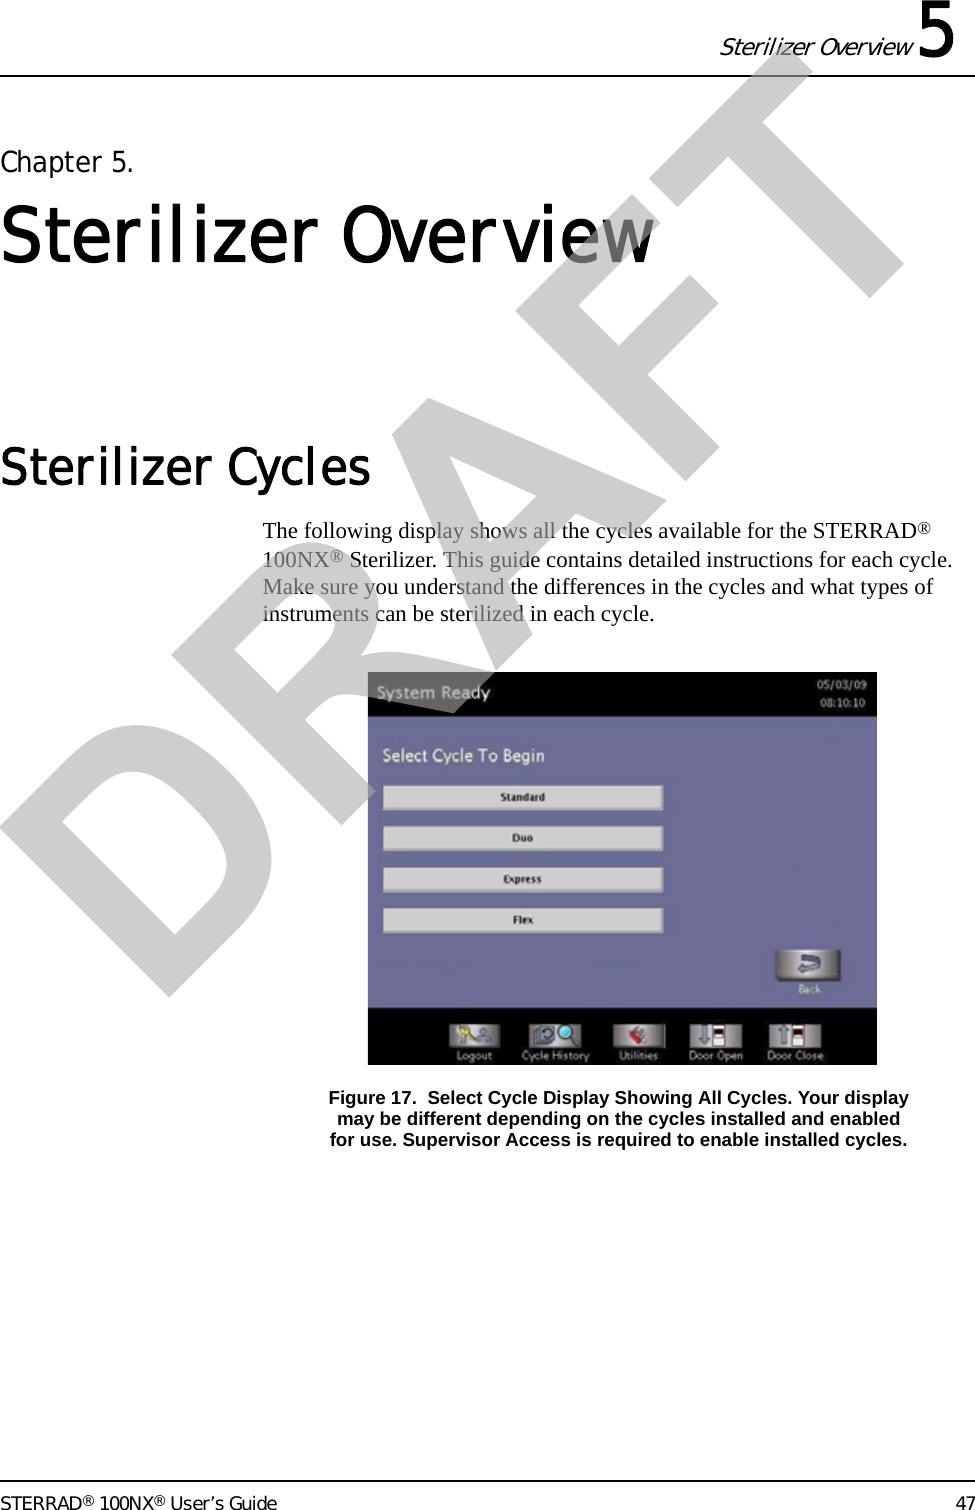 Sterilizer Overview 5STERRAD® 100NX® User’s Guide 47Chapter 5. Sterilizer OverviewSterilizer Cycles The following display shows all the cycles available for the STERRAD® 100NX® Sterilizer. This guide contains detailed instructions for each cycle. Make sure you understand the differences in the cycles and what types of instruments can be sterilized in each cycle.Figure 17.  Select Cycle Display Showing All Cycles. Your displaymay be different depending on the cycles installed and enabledfor use. Supervisor Access is required to enable installed cycles.DRAFT